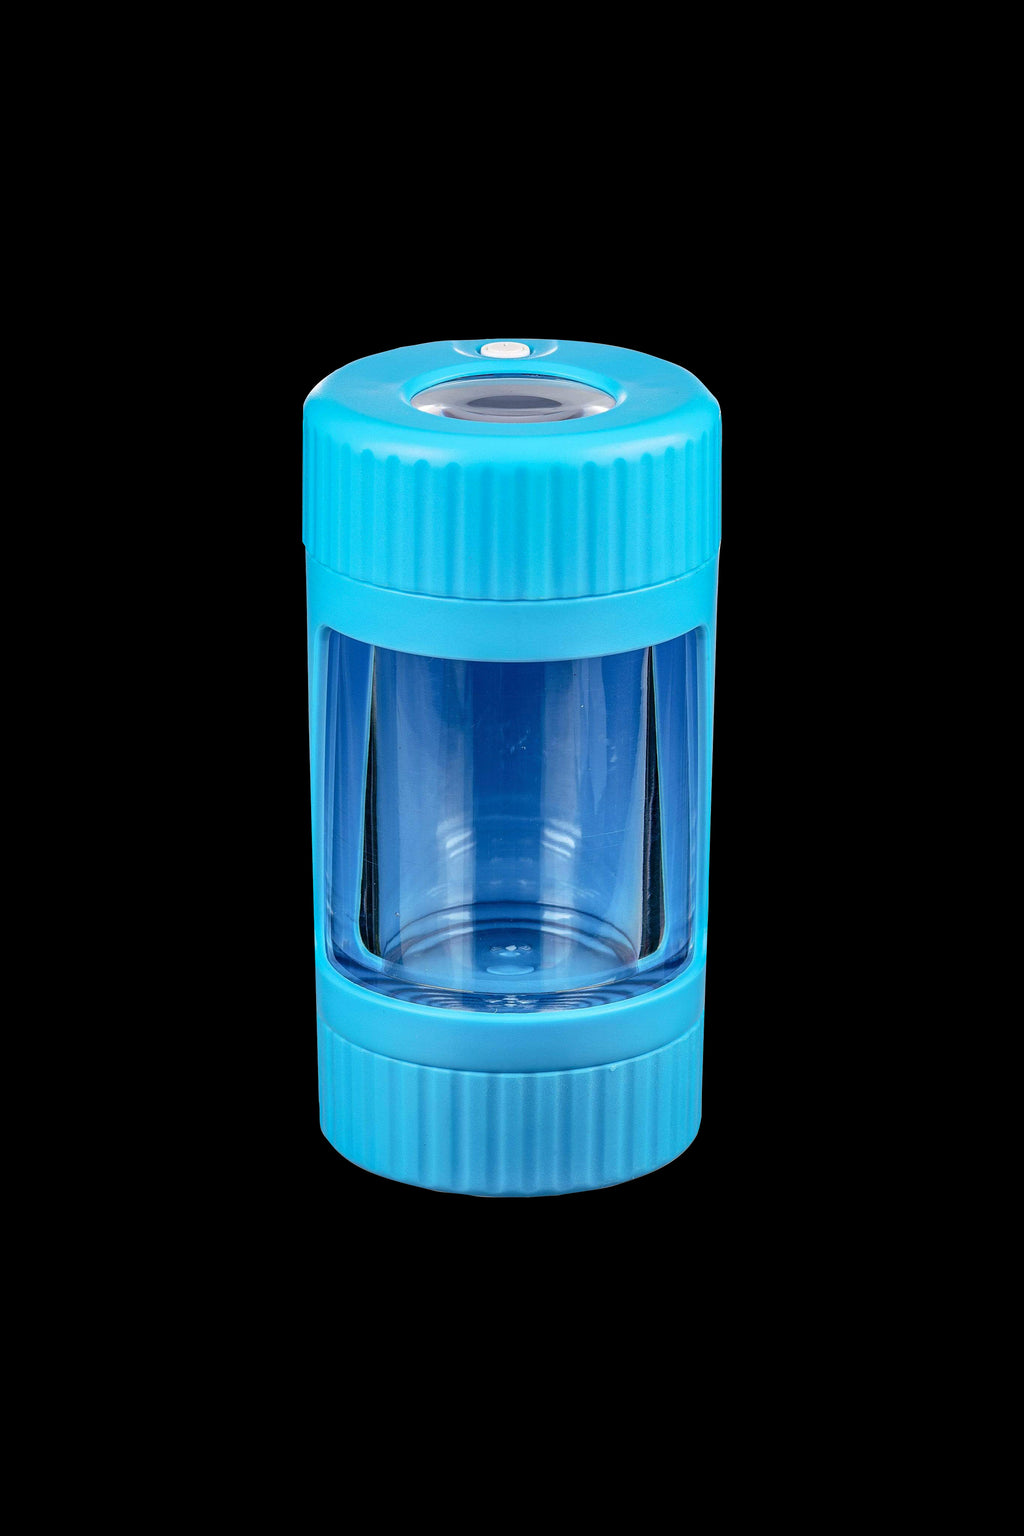 Cookies 4 in 1 Airtight LED Magnifying Jar w/Grinder & One-Hitter